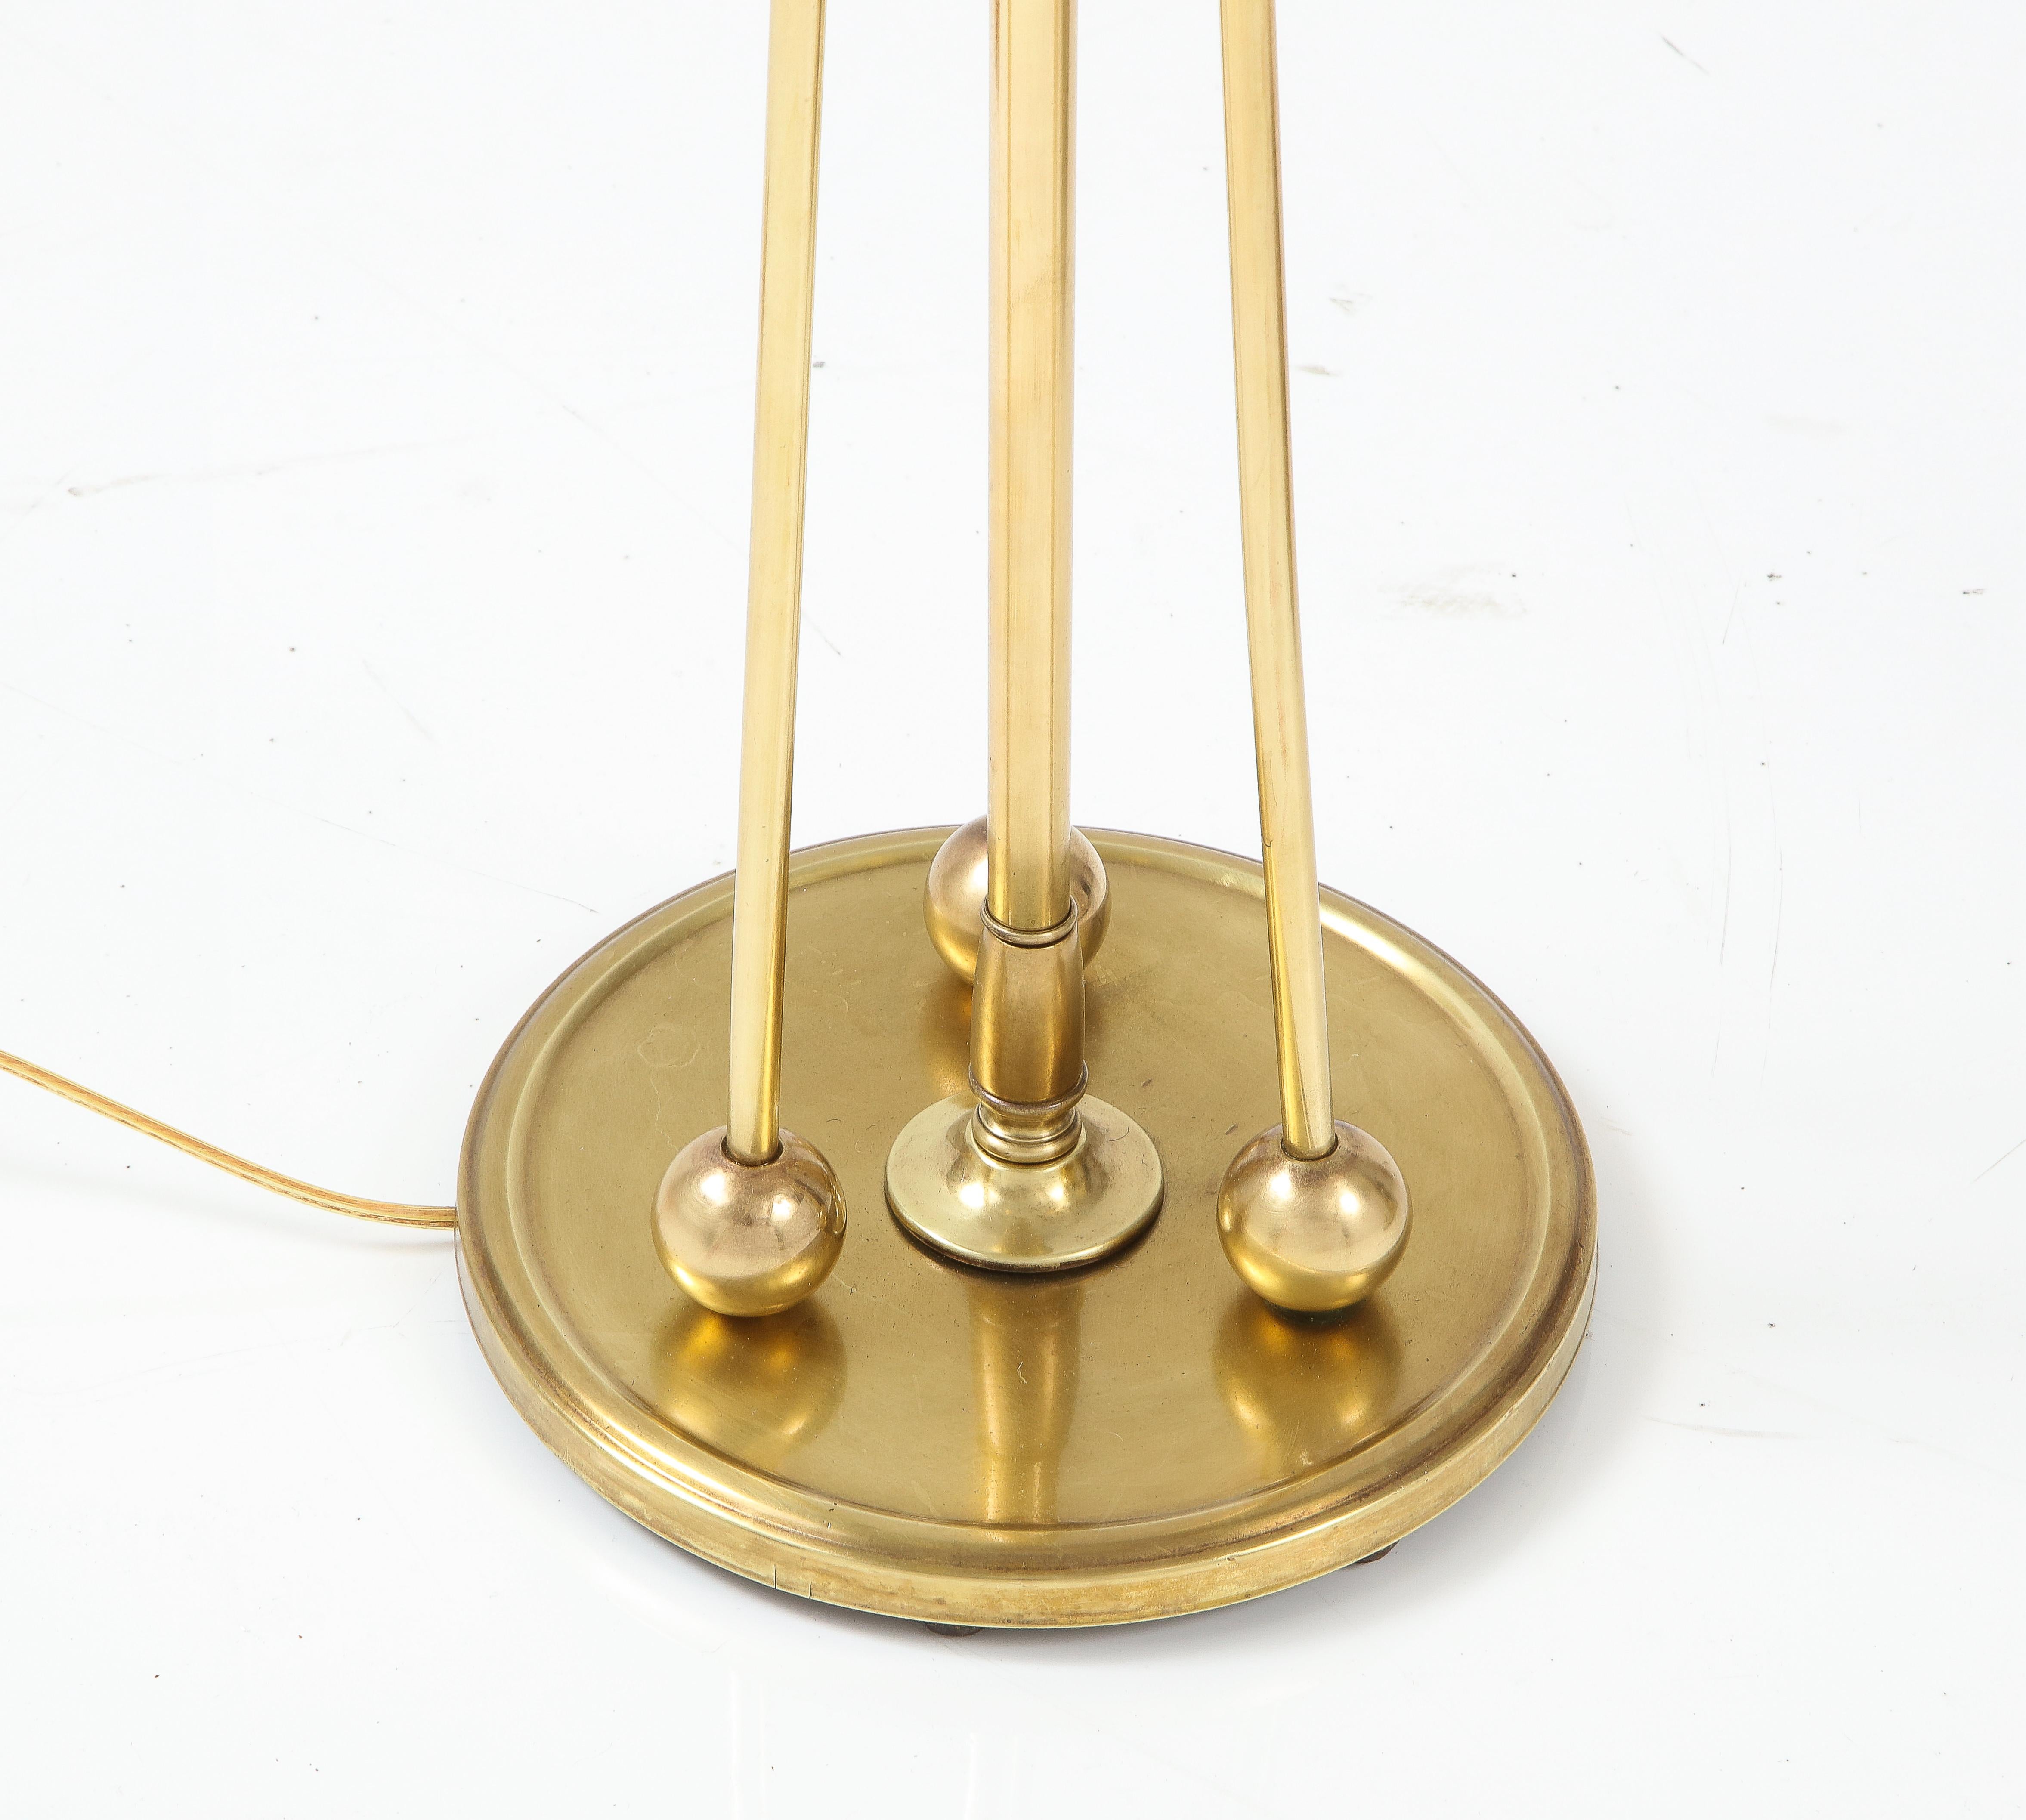 Mid-20th Century 1950's French Solid Brass with Perforated Lamps Shades Tripod Floor Lamps